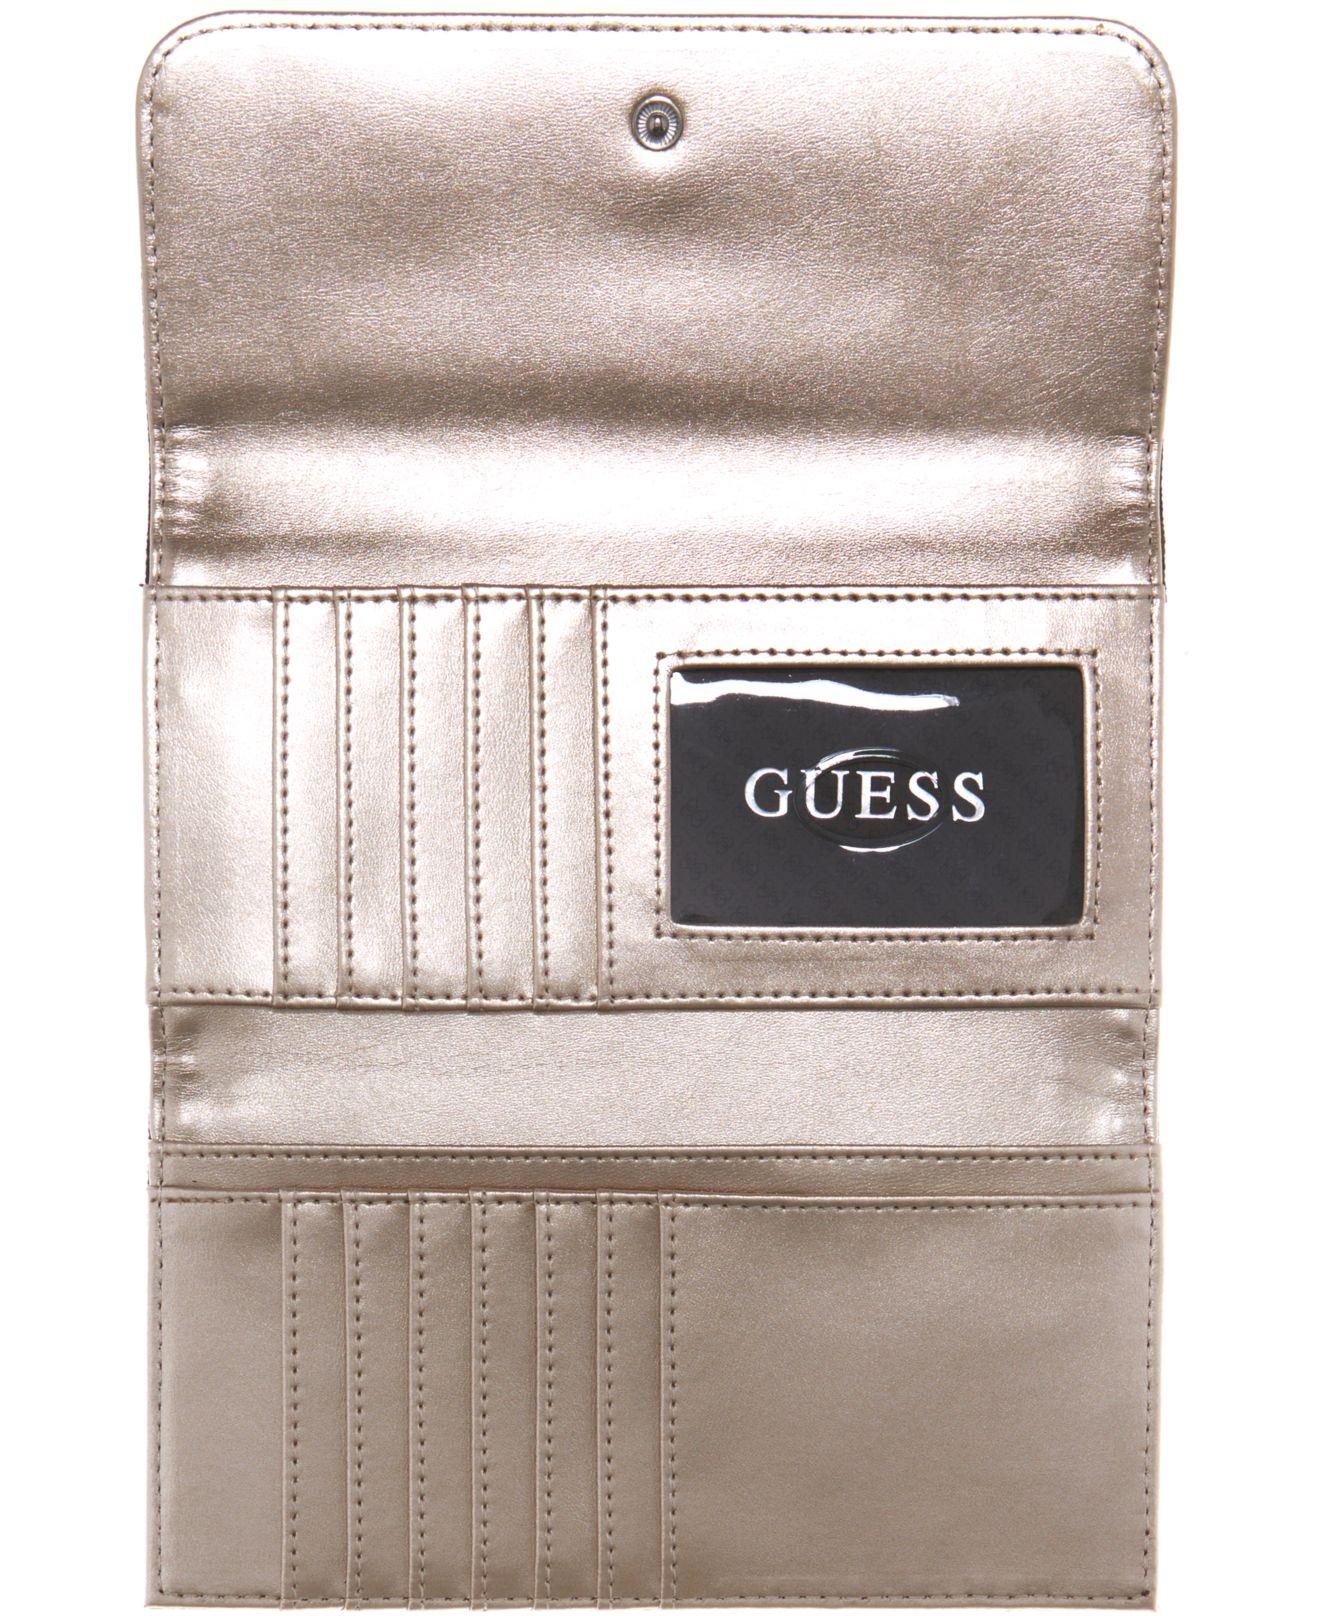 Guess Pish Posh Floral Slim Clutch Wallet in Pink Floral/Gold 